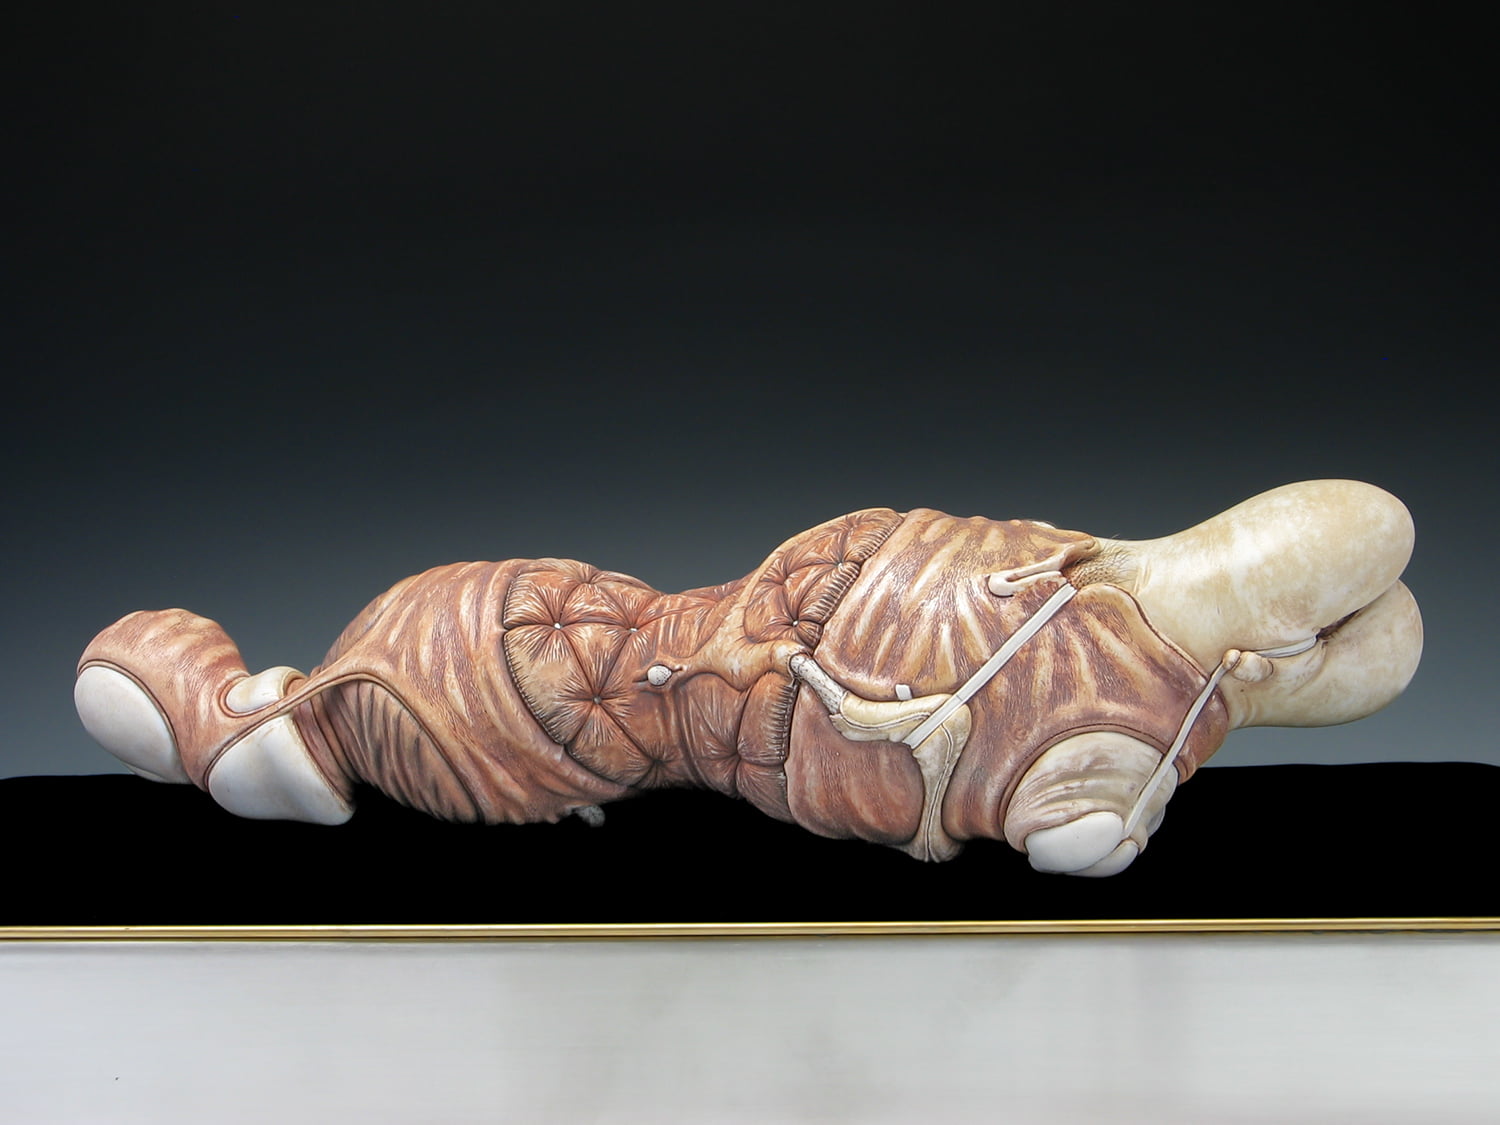 Jason Briggs "Stretch". Porcelain, hair, and mixed media. Sculptural ceramic art object.